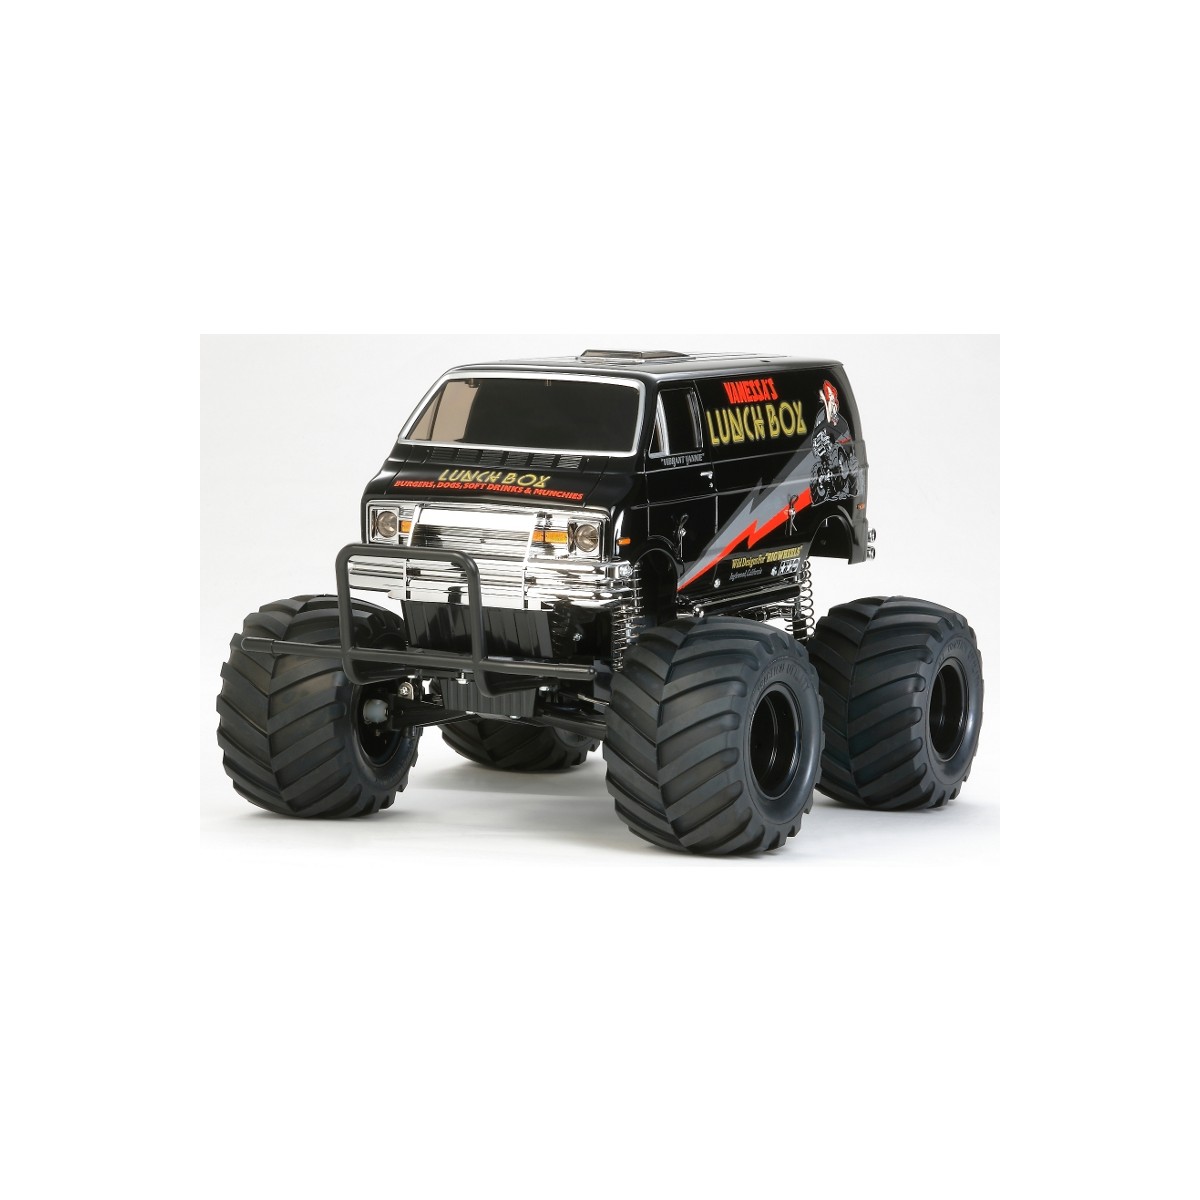 Tamiya Lunch Box Black Edition 2WD Electric Monster Truck Kit – Racer Rc